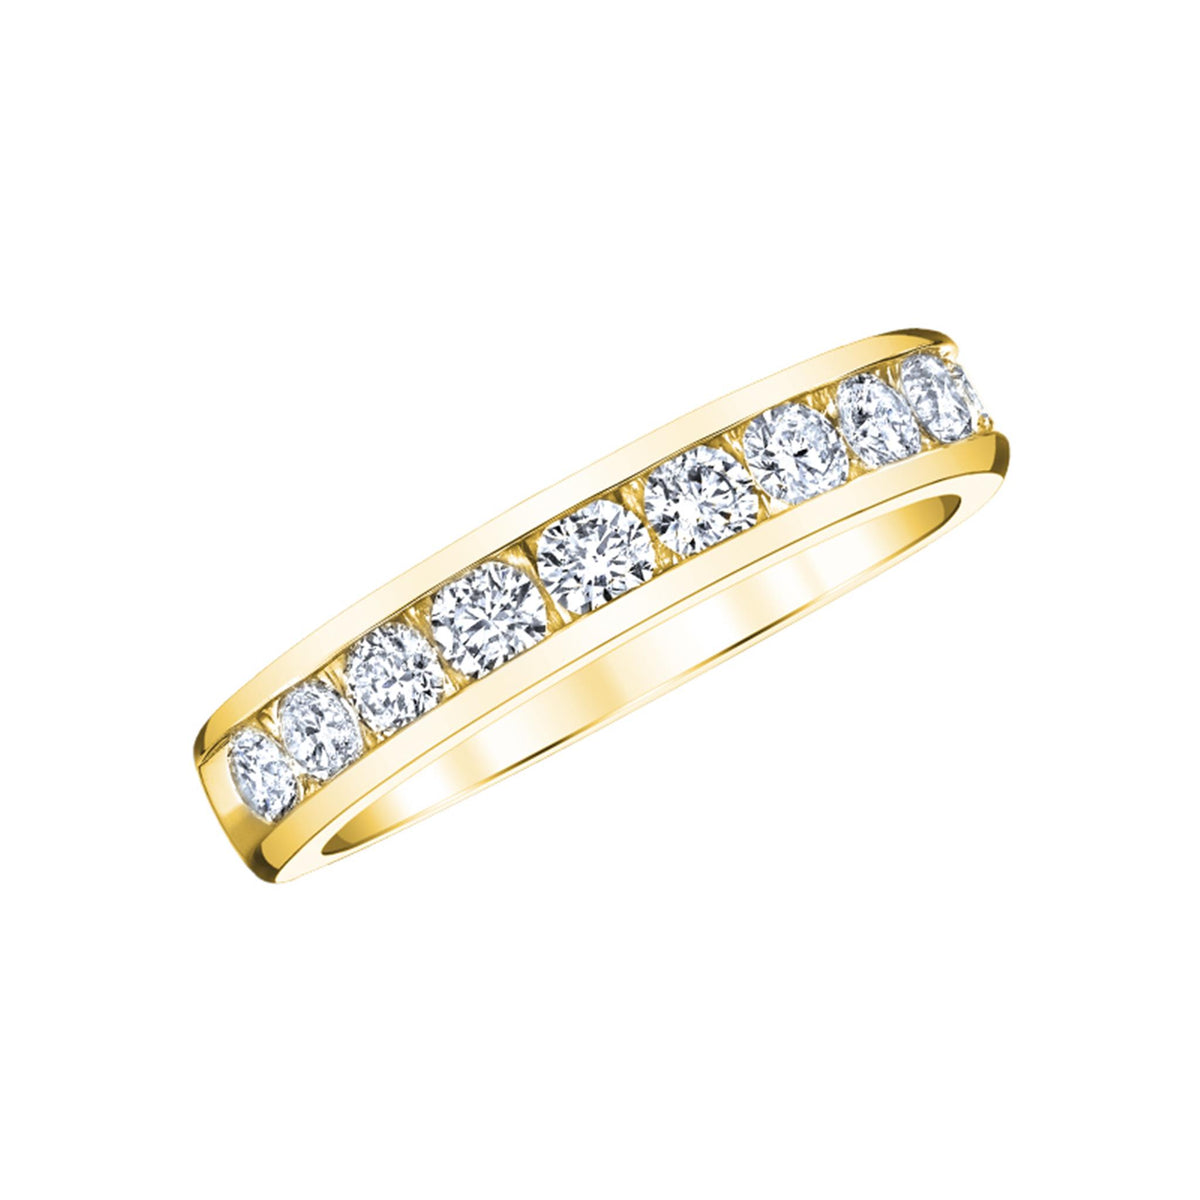 14Kt Yellow Gold Channel Set Wedding Ring With 0.25cttw Natural Diamonds